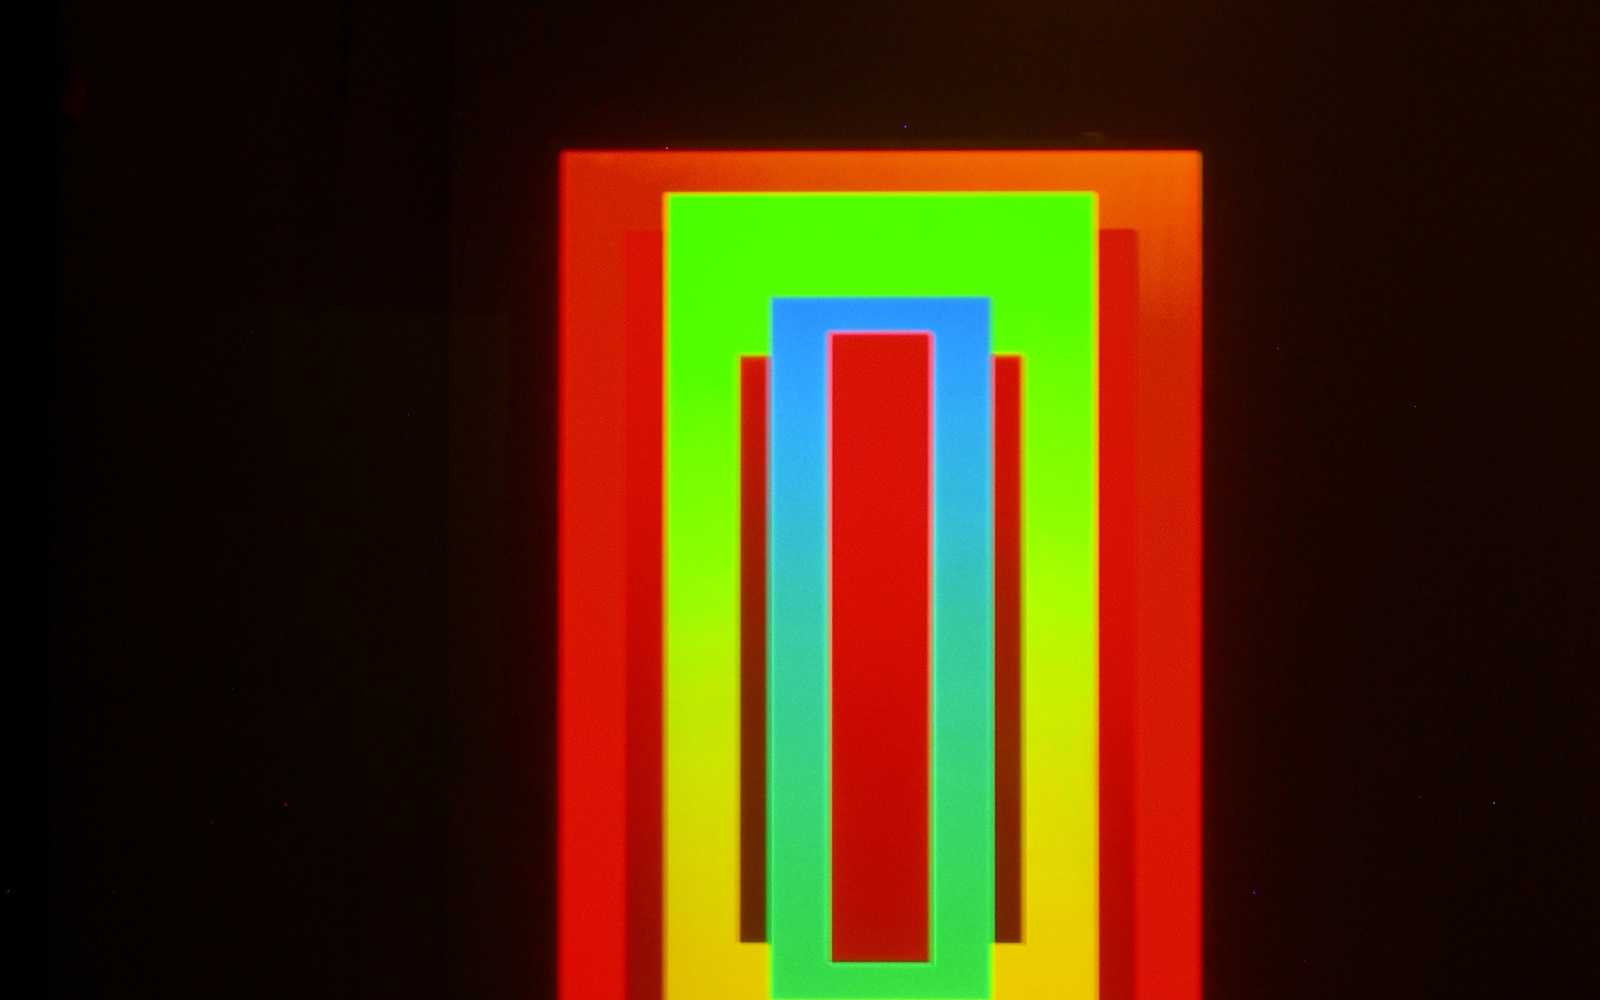 The installation Red in Green in Blue #3 by Dieter Jung from 2011.